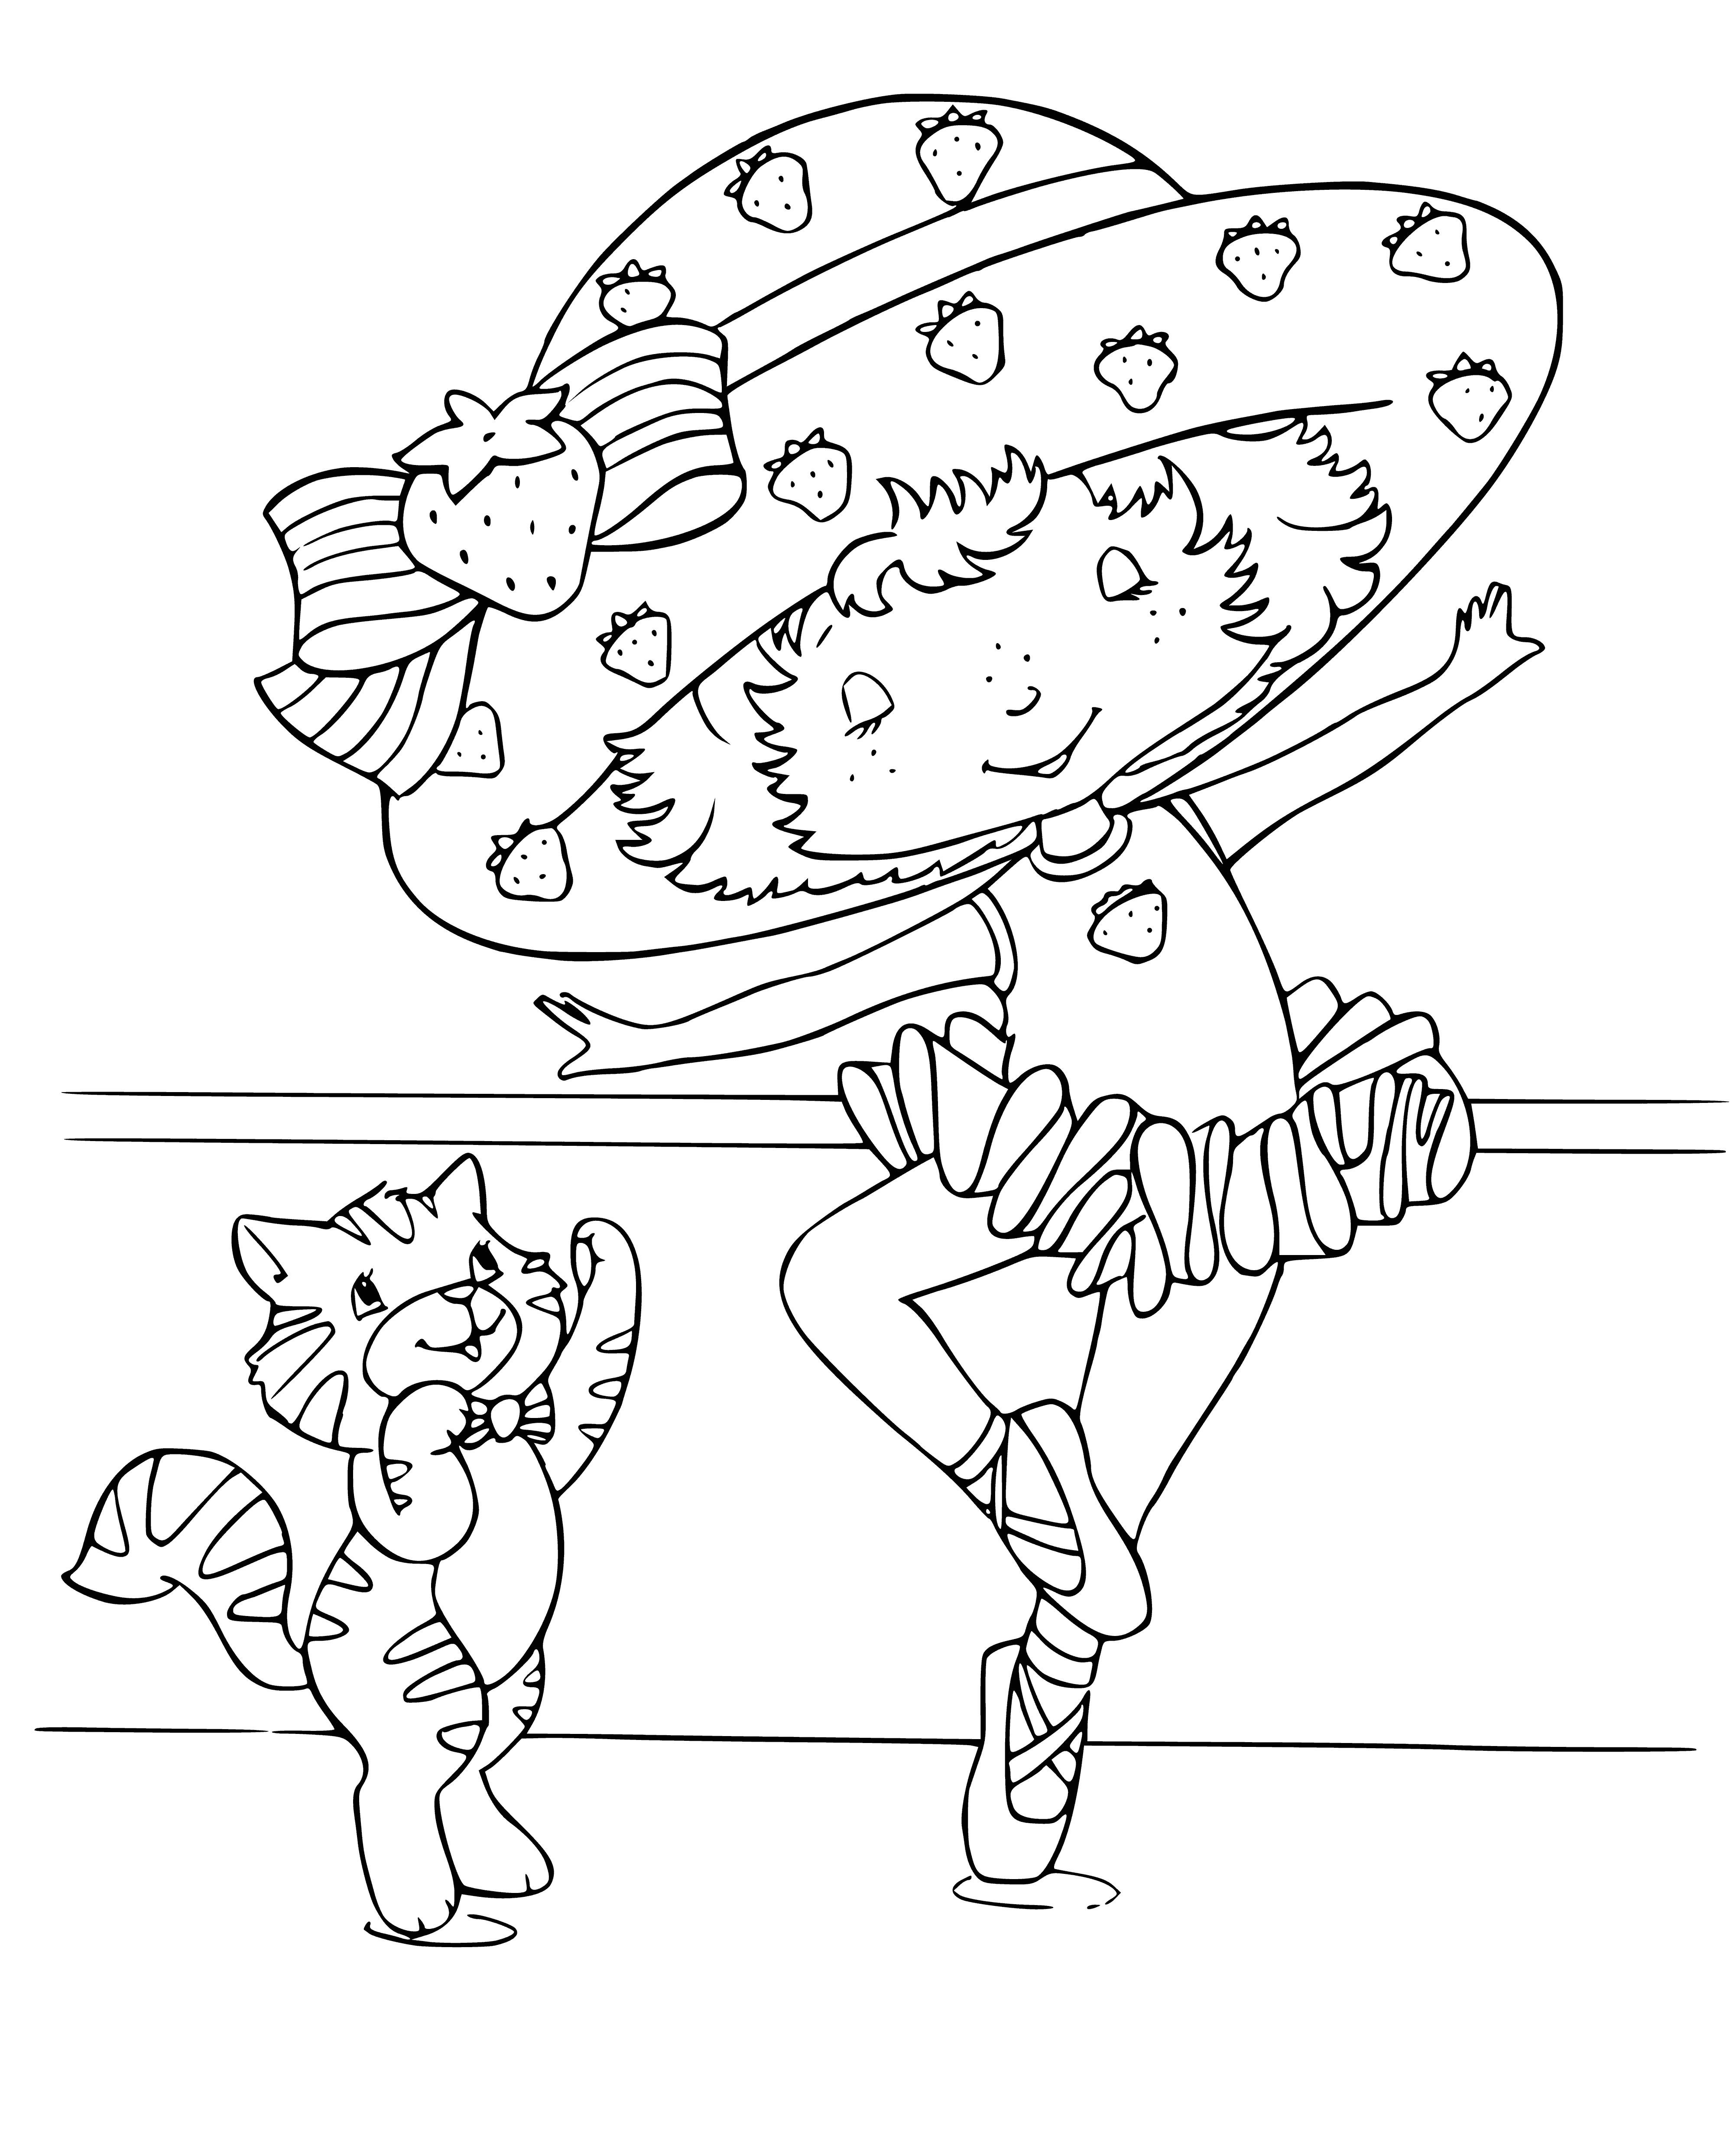 coloring page: Young ballerina practices steps in a dance studio, wearing a leotard, slippers and tutu, her bun determined as she perfects her moves.